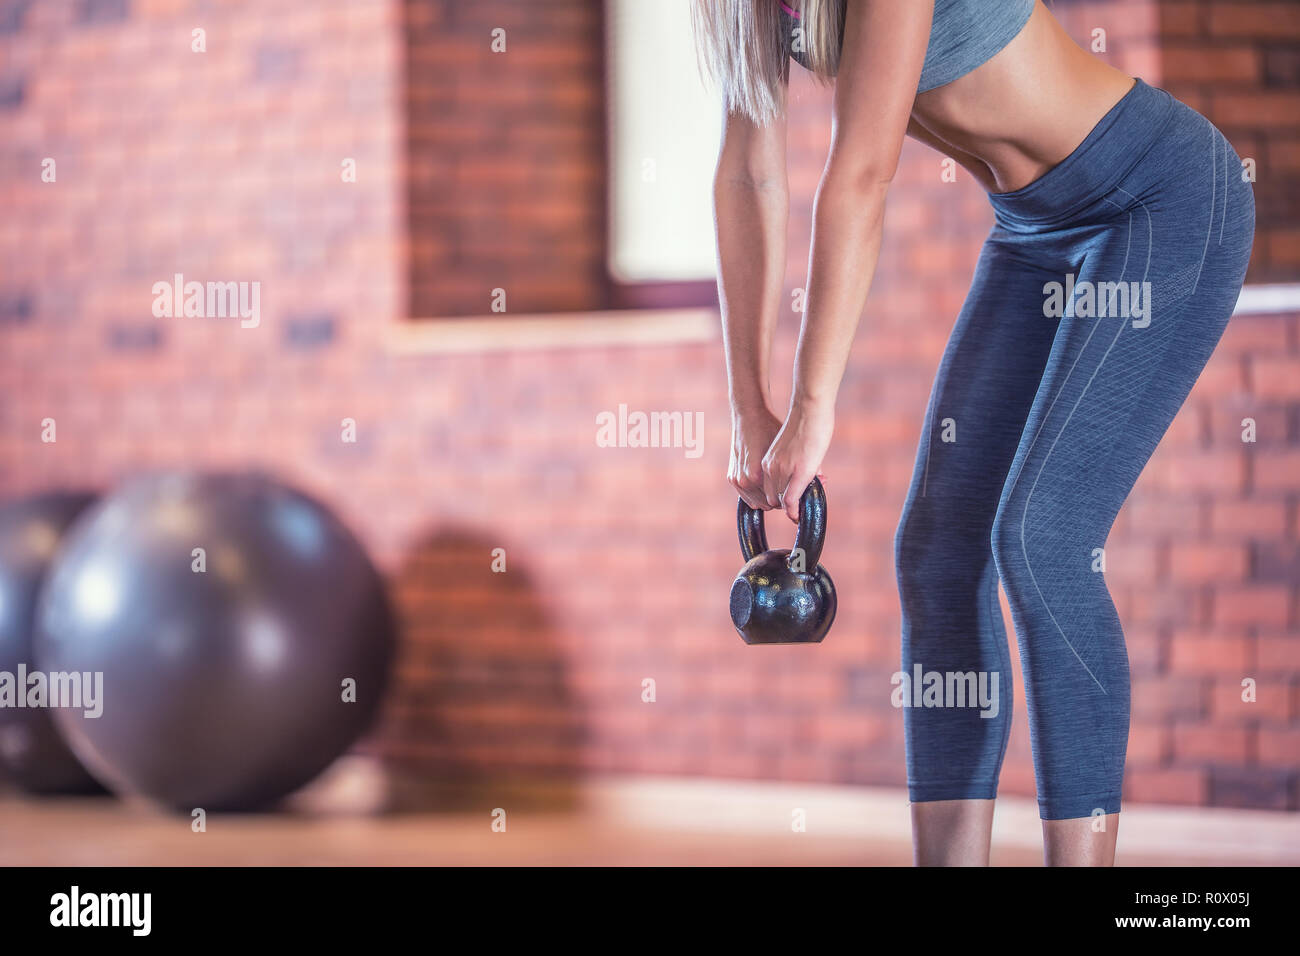 Attractive woman with slim body in gym holding a kettlebell. Stock Photo